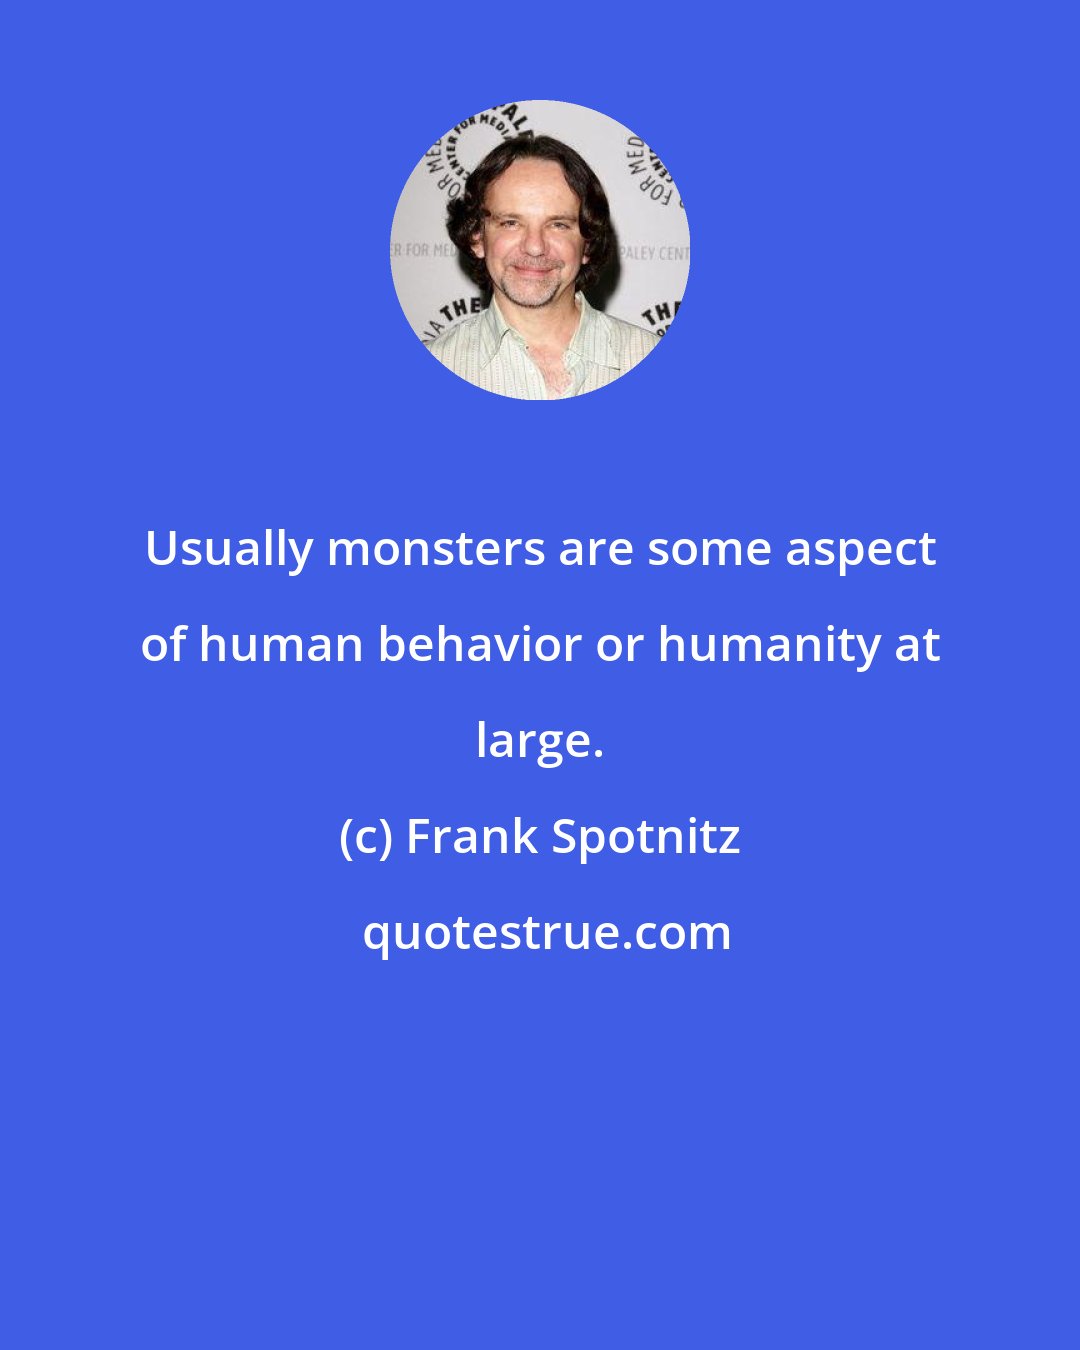 Frank Spotnitz: Usually monsters are some aspect of human behavior or humanity at large.